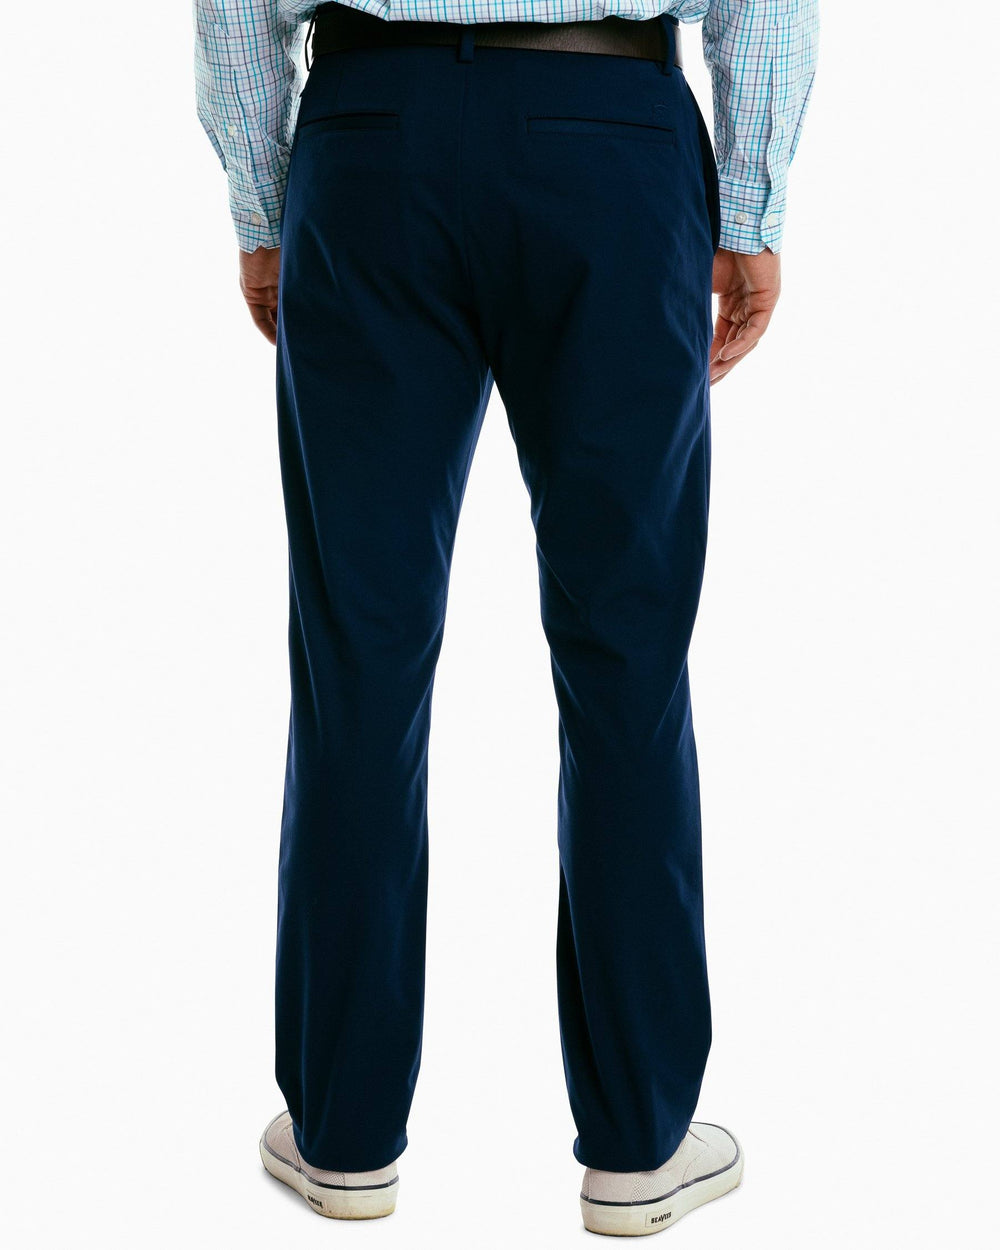 The back view of the Men's Jack Performance Pant by Southern Tide - True Navy